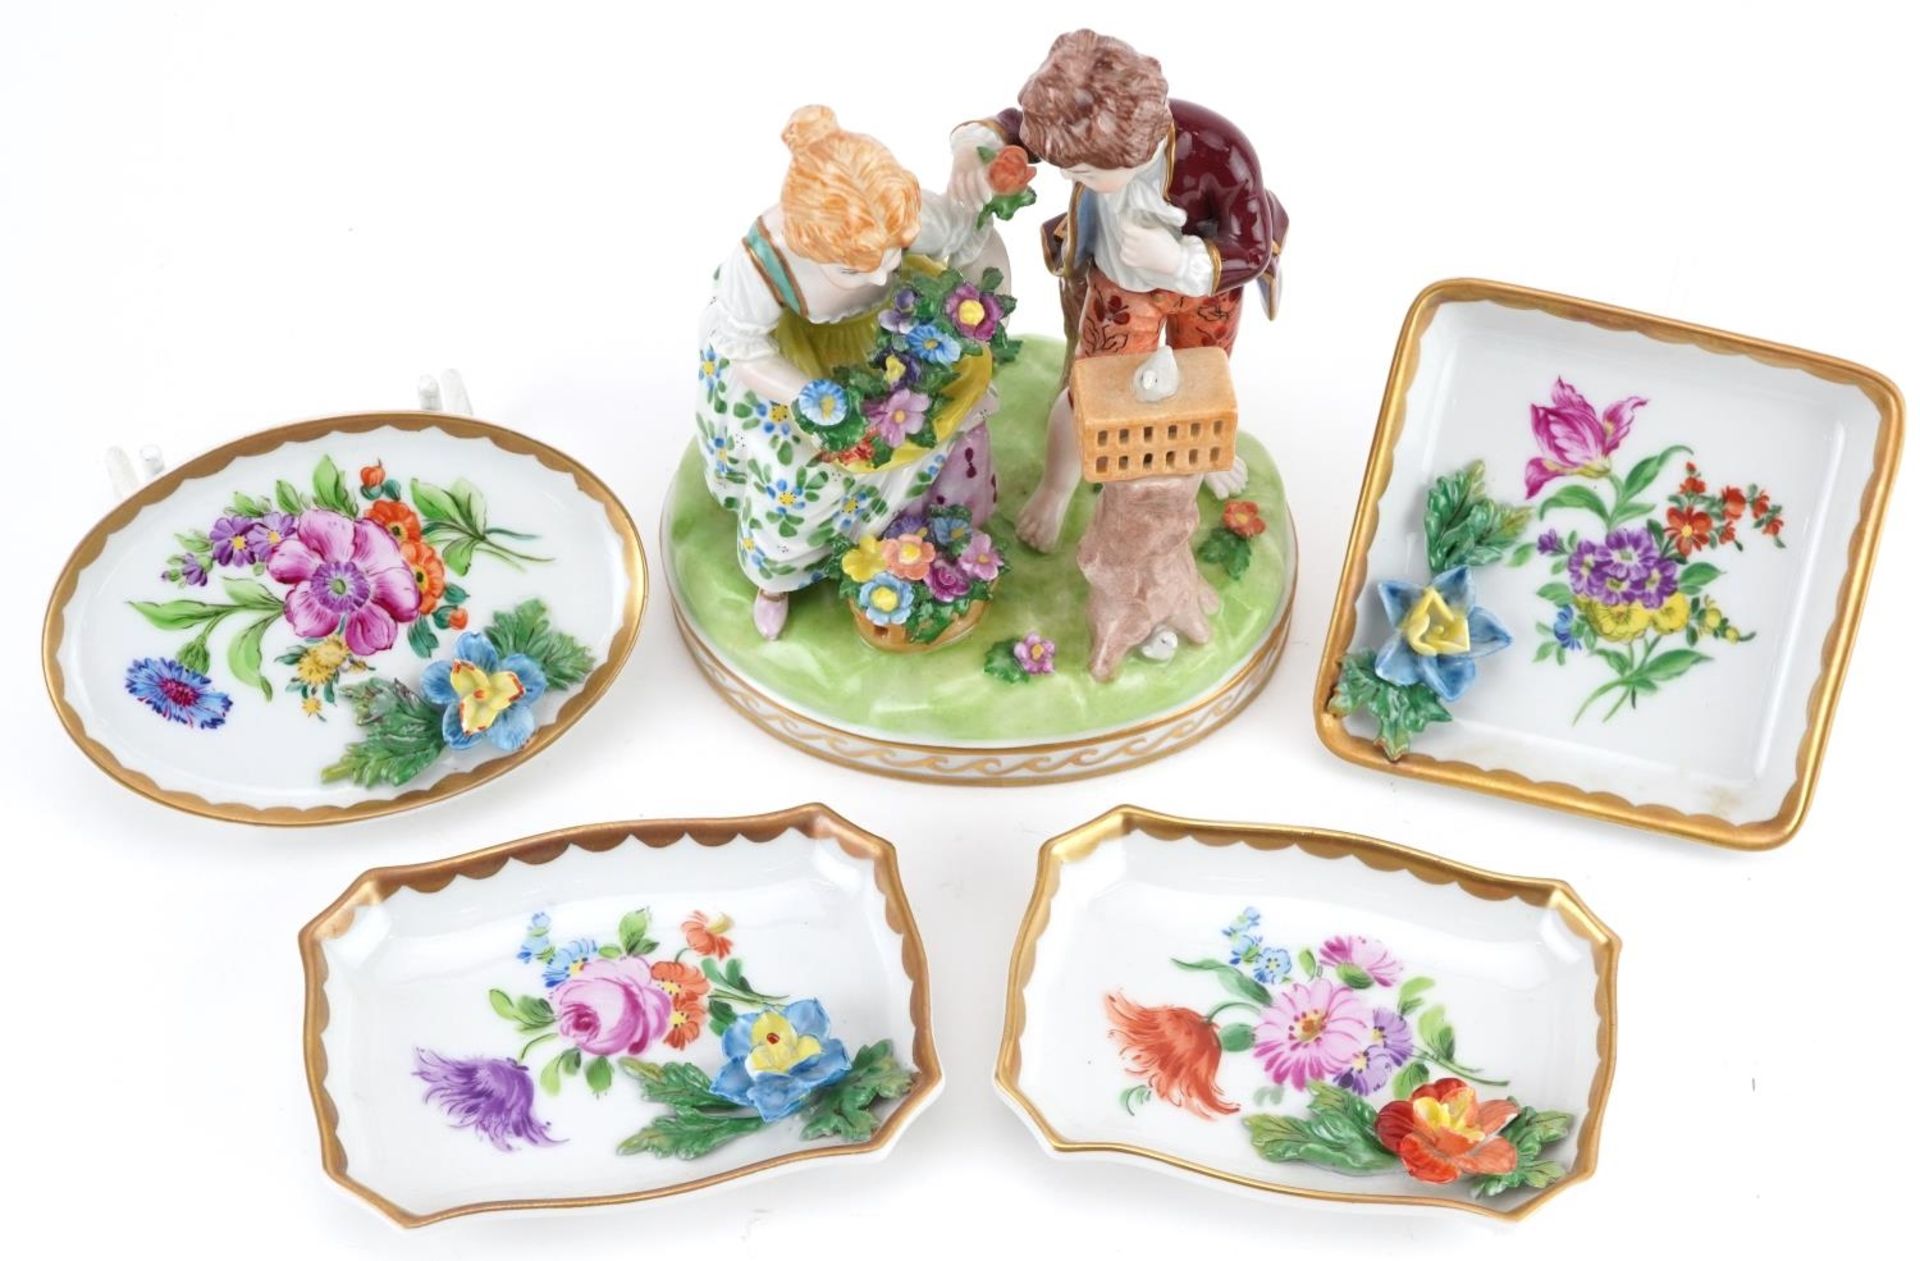 Dresden, German porcelain including a summer figure group of a young boy and girl holding flowers - Image 4 of 6